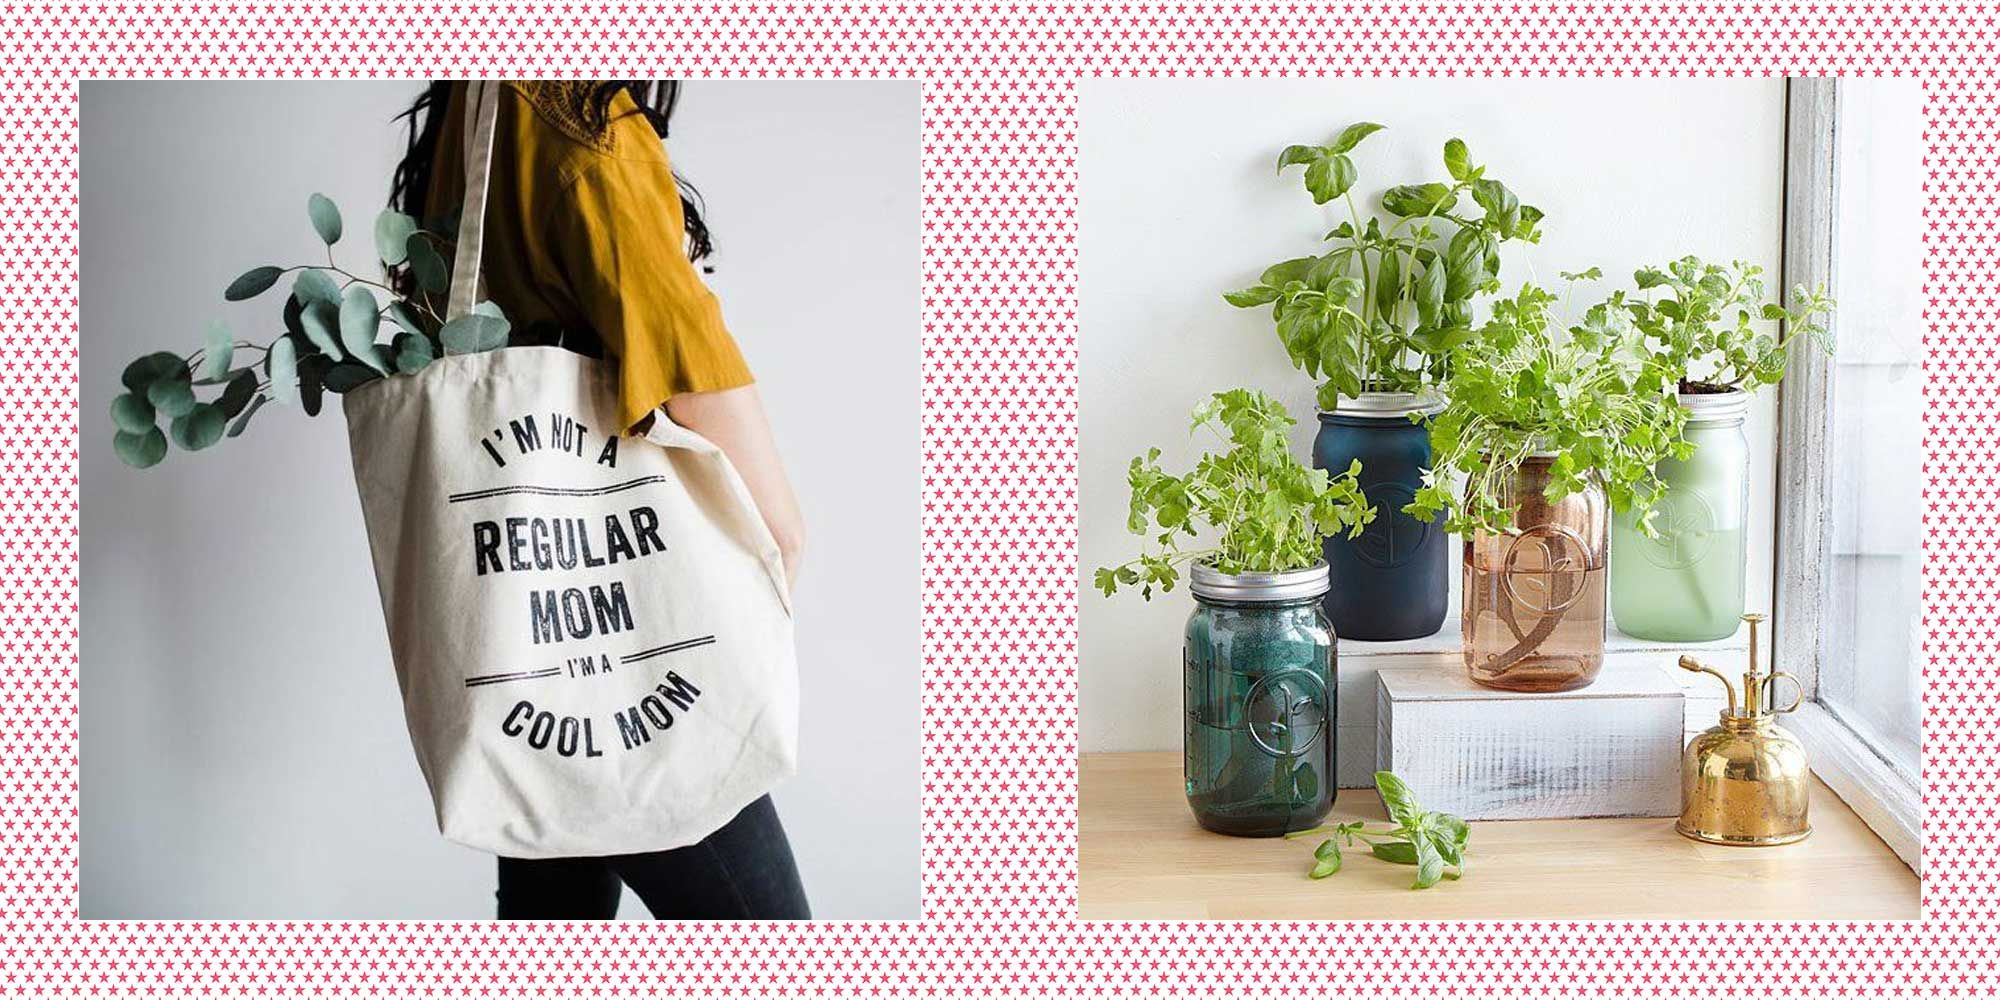 Mother's Day Gift for Mom Tote Bag World's Best Mom My Favorite People Call Me Mom Tote for Mom Mother's Day Gift Mom Gift